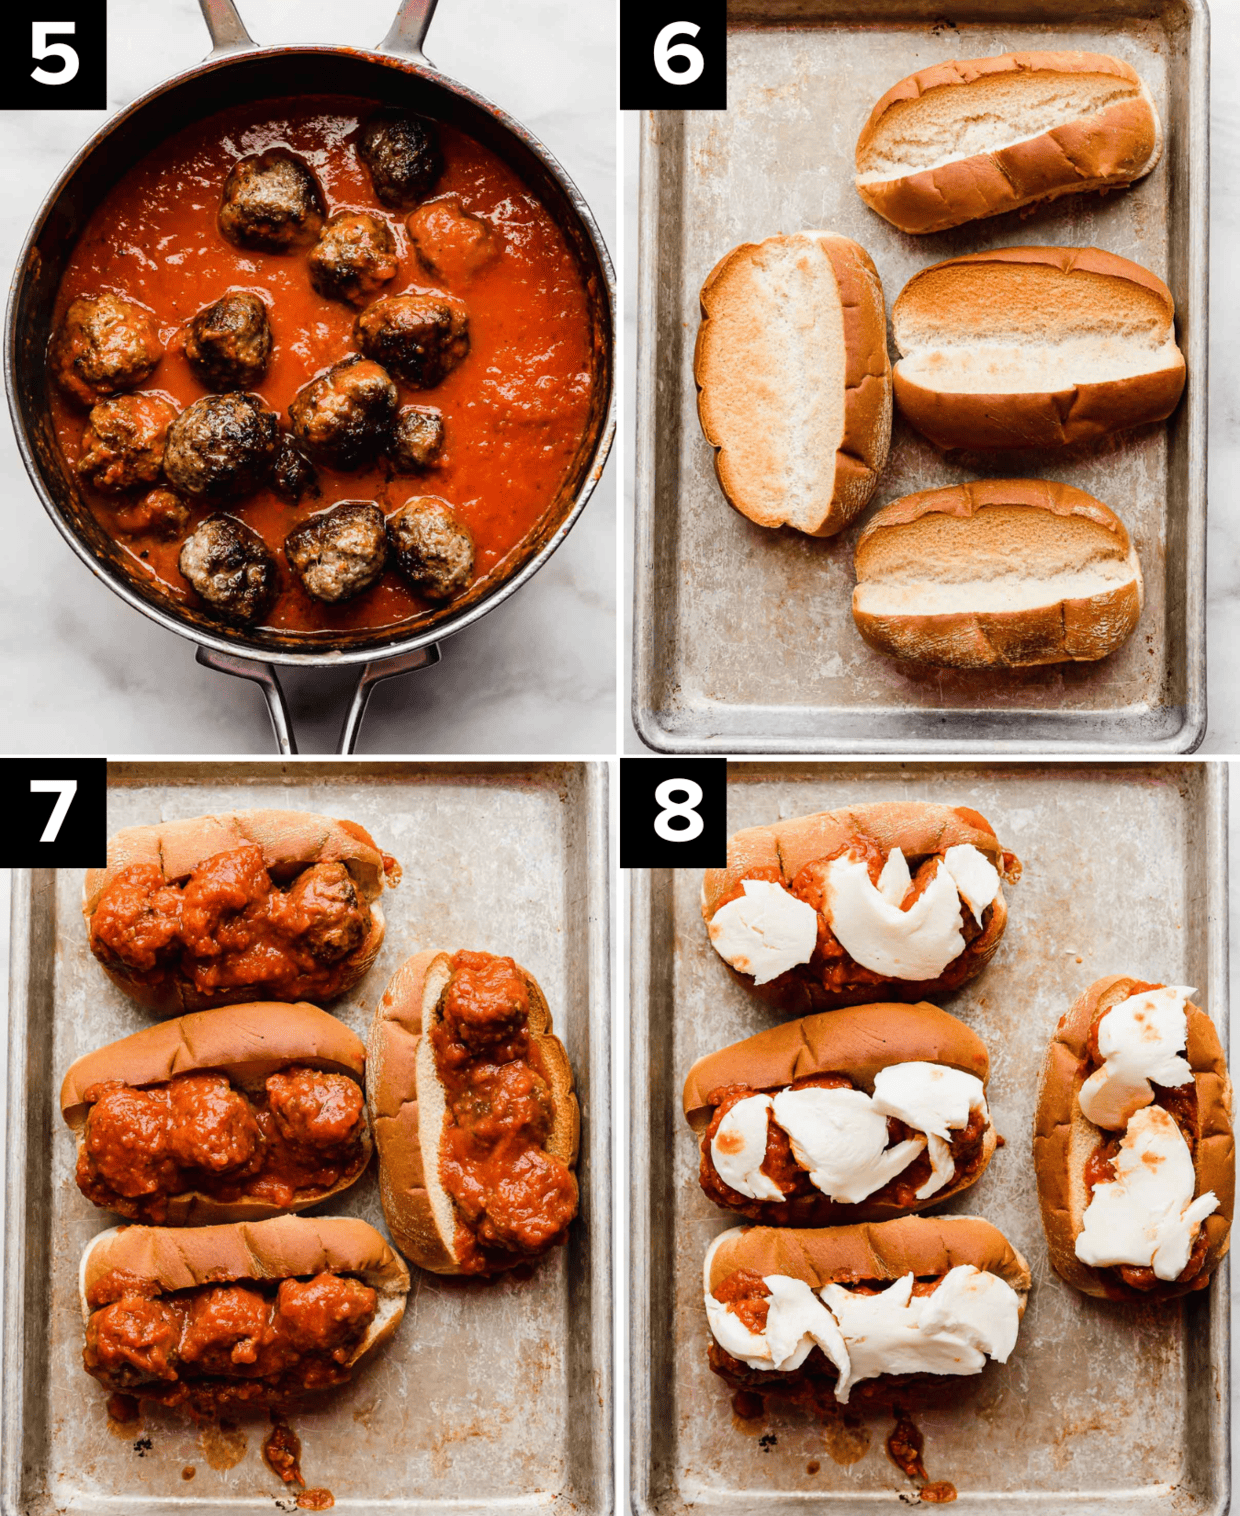 Four photos showing the process of how to make Italian Meatball Subs on toasted hoagie buns then topped with fresh mozzarella cheese.